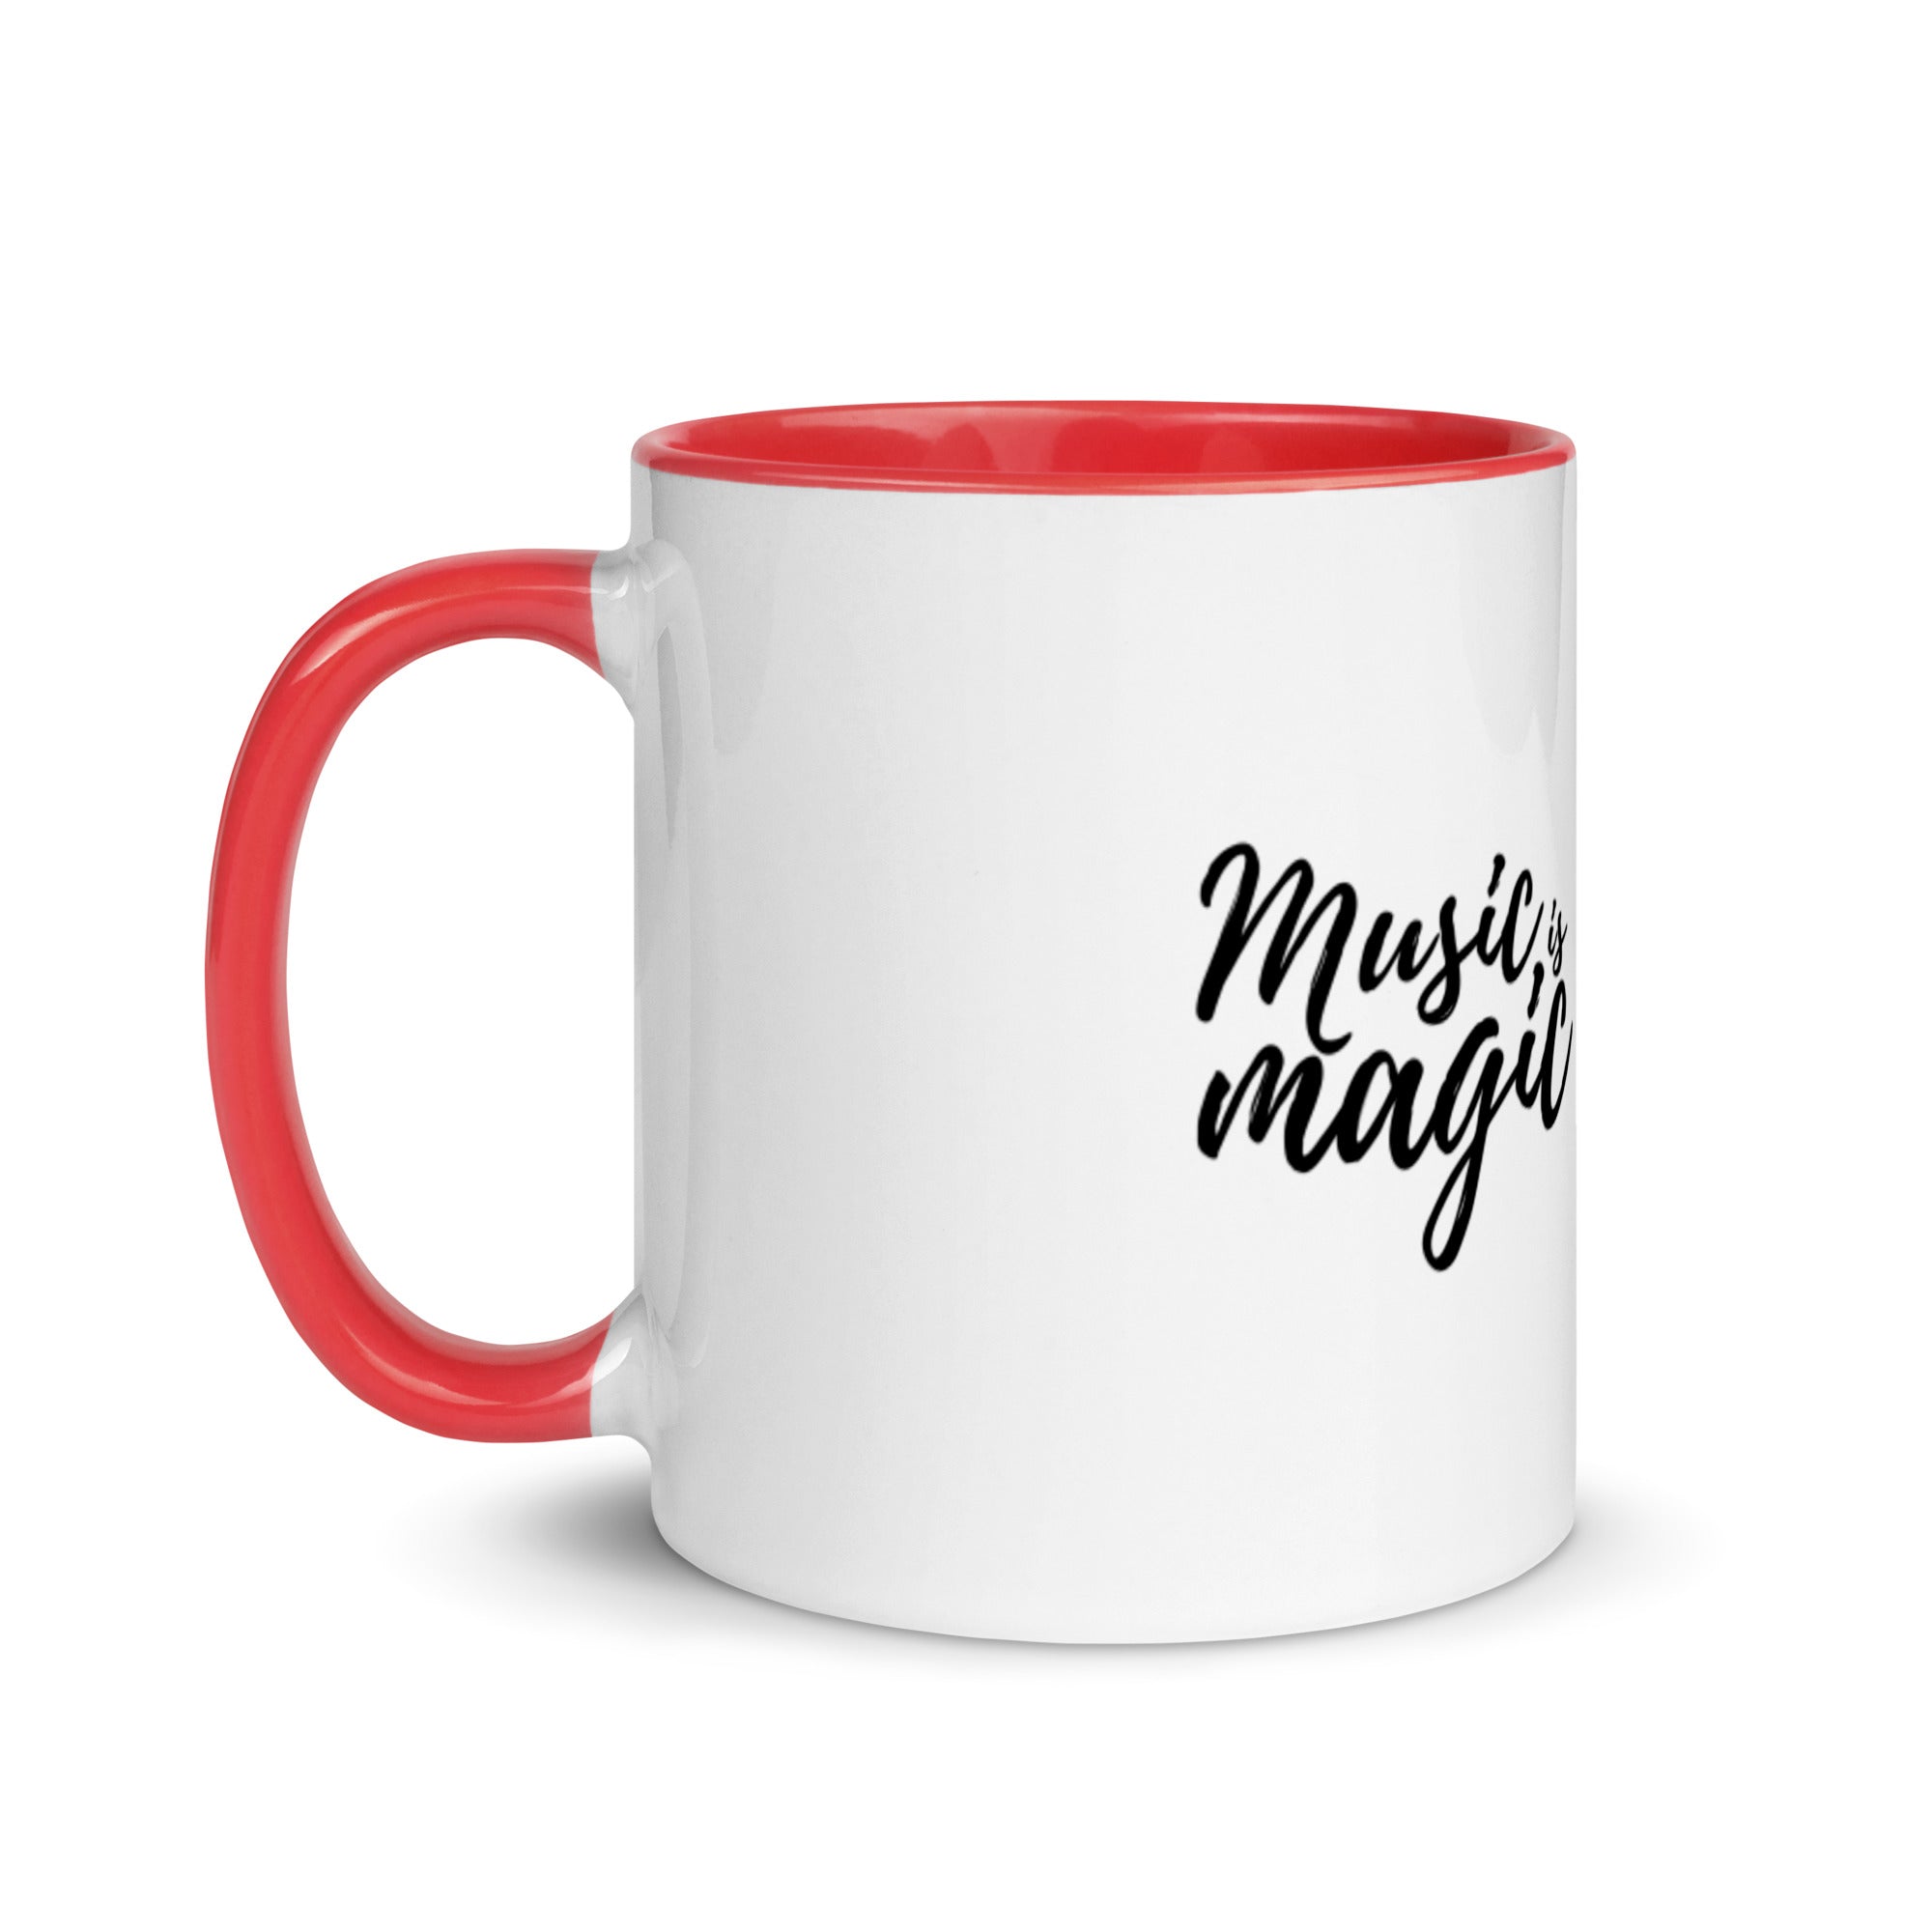 Music Is Magic - Mug with Color Inside